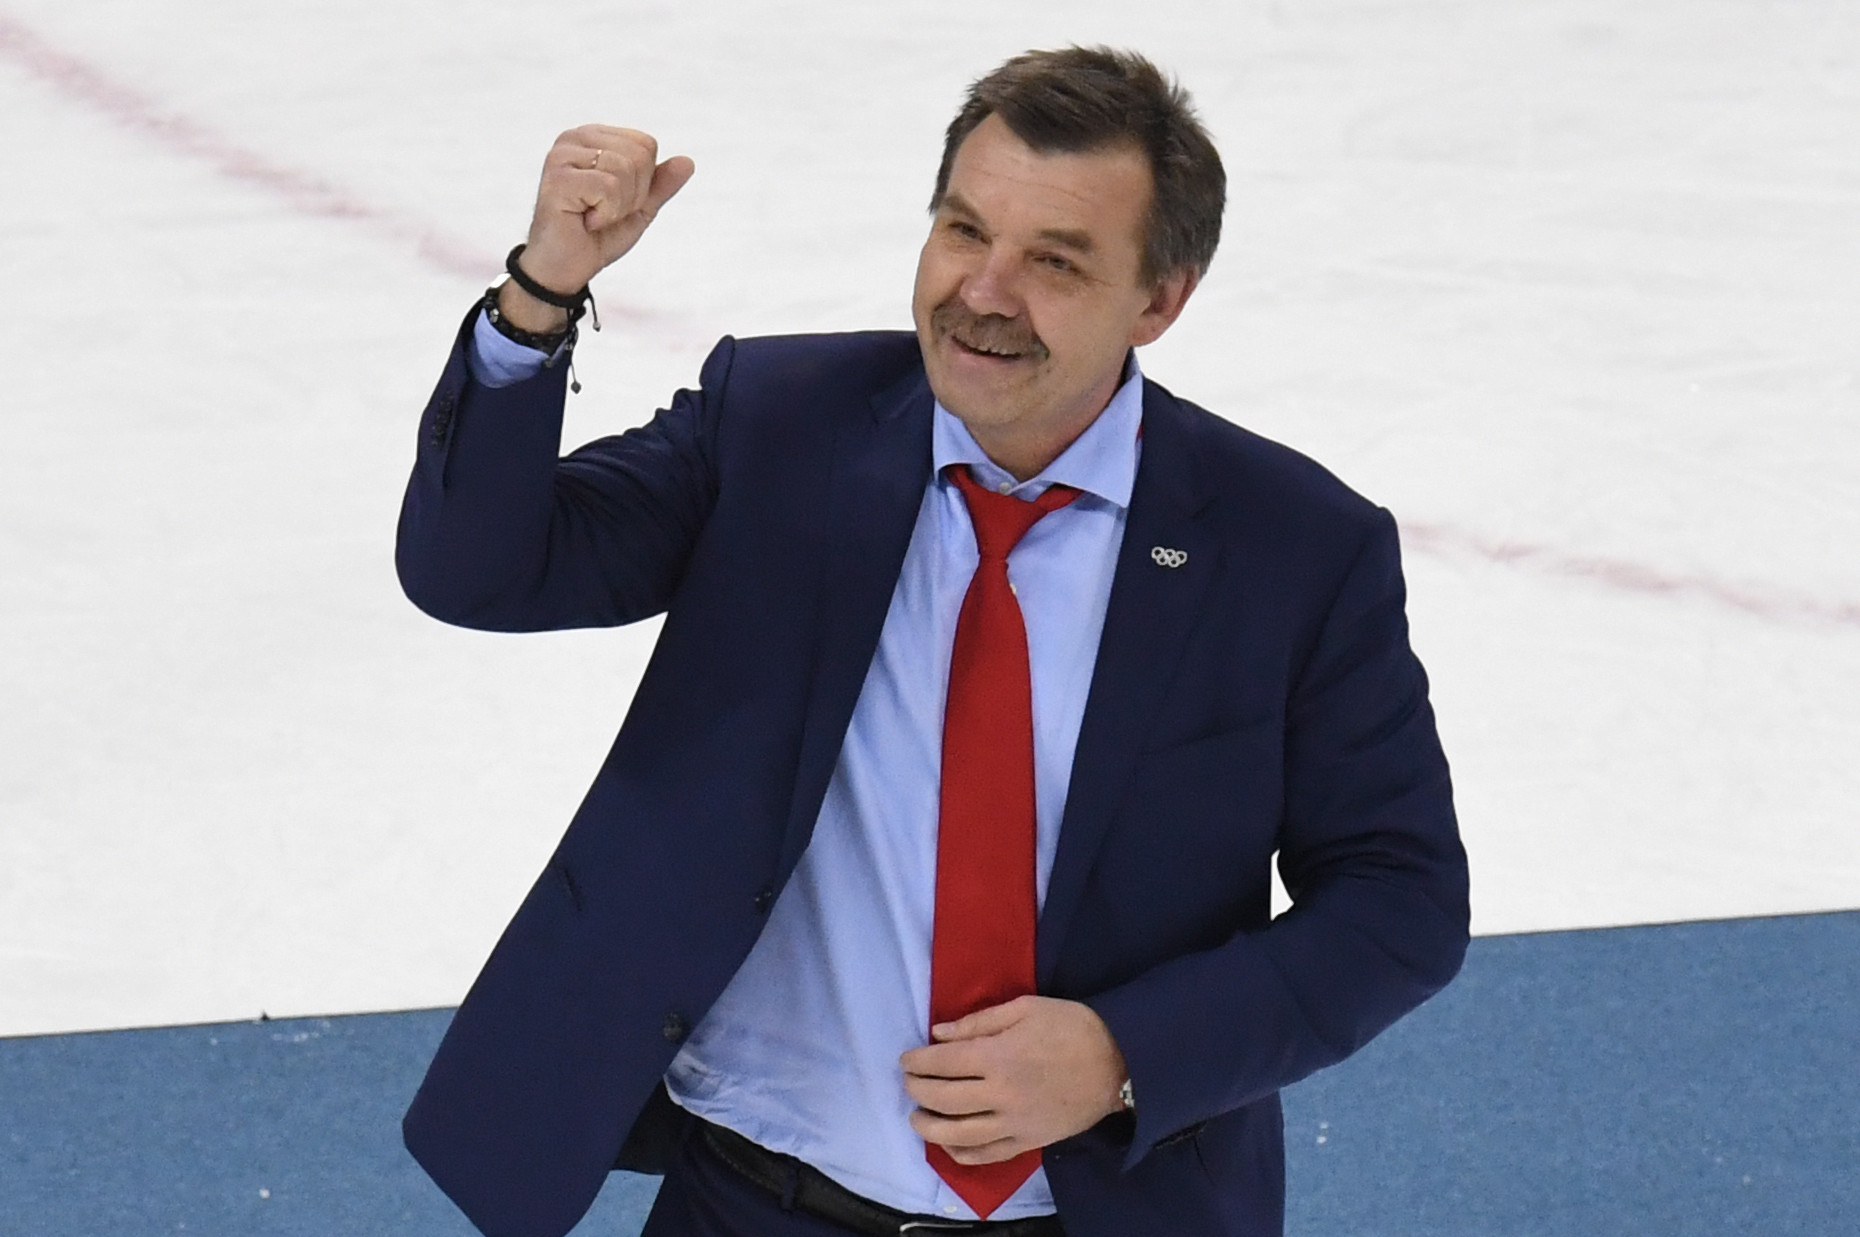 Oleg Znarok has temporarily stepped down as the head coach of the Russian national men's ice hockey team ©Getty Images